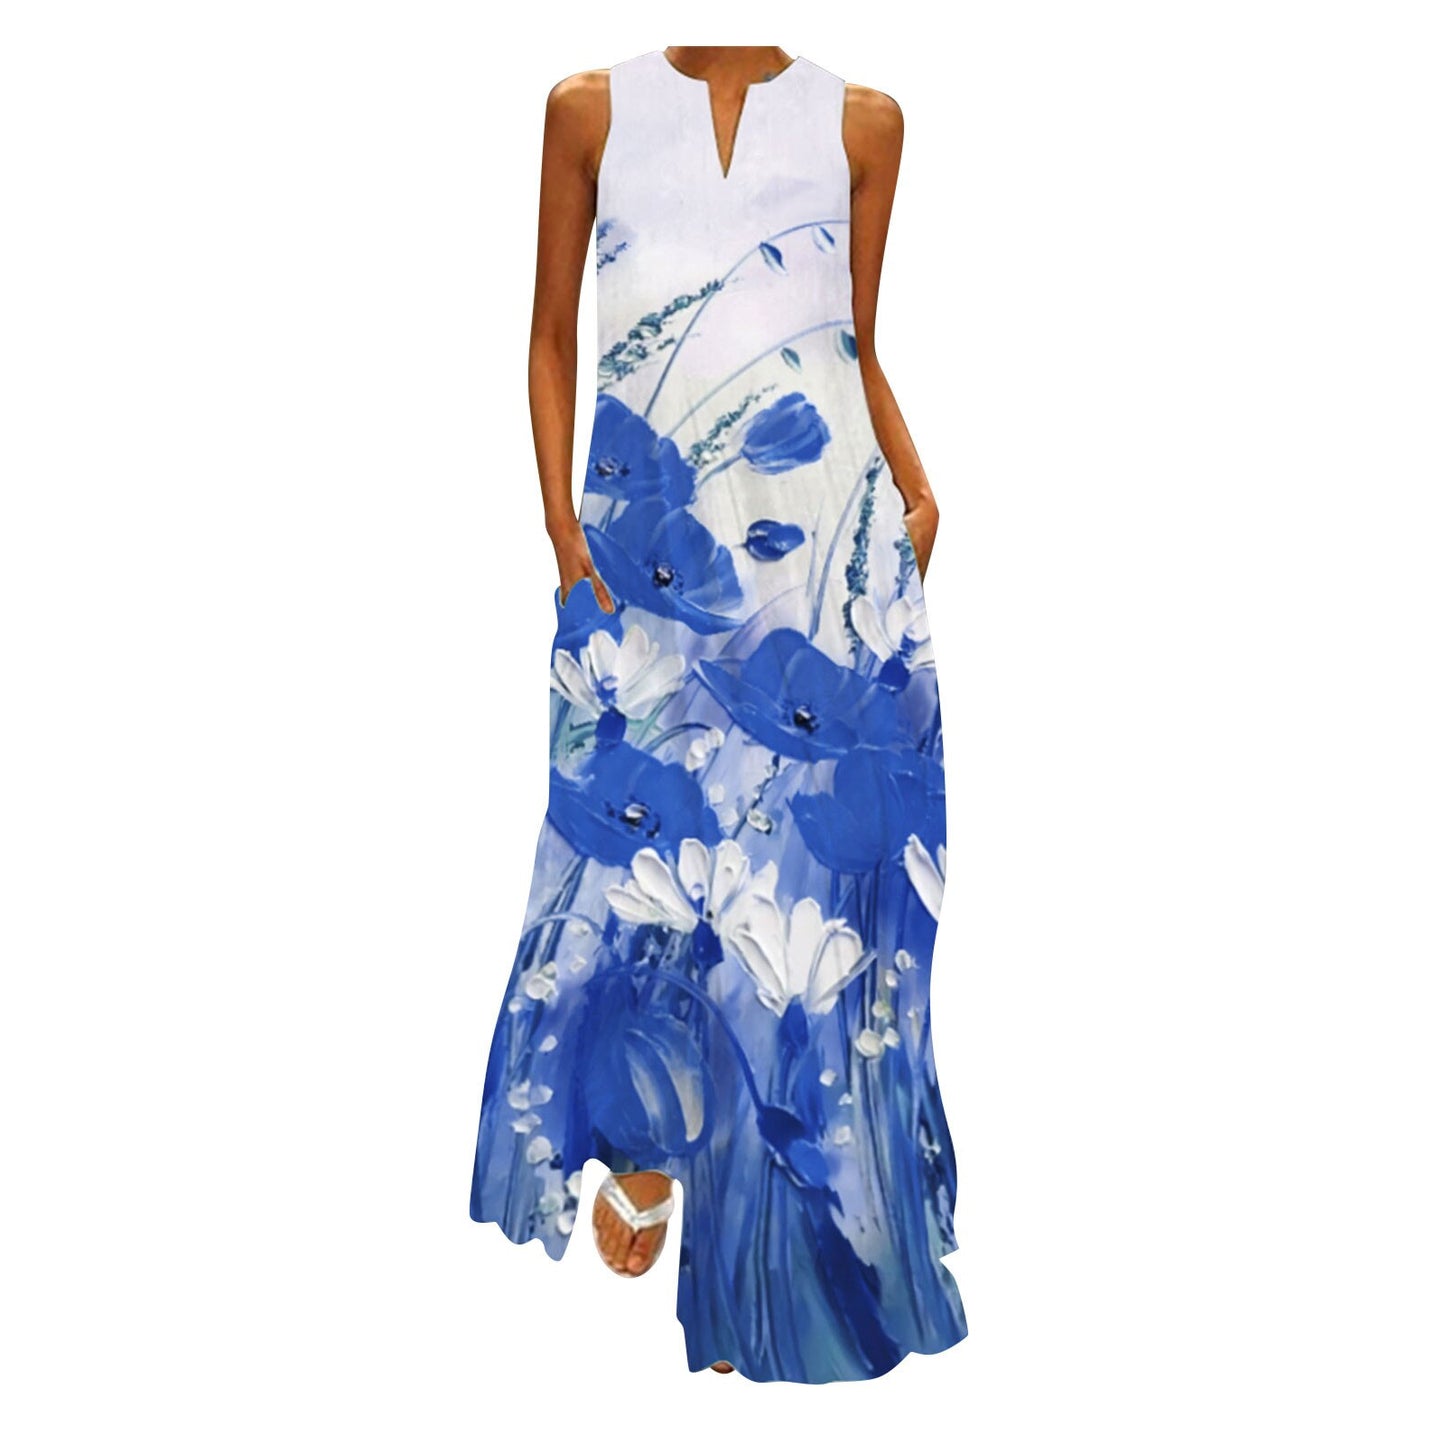 Women Sleeveless Floral Print V-neck Maxi Dress Summer Party Wear Evening Party Dresses Plus Size Casual Loose Robes Vestidos